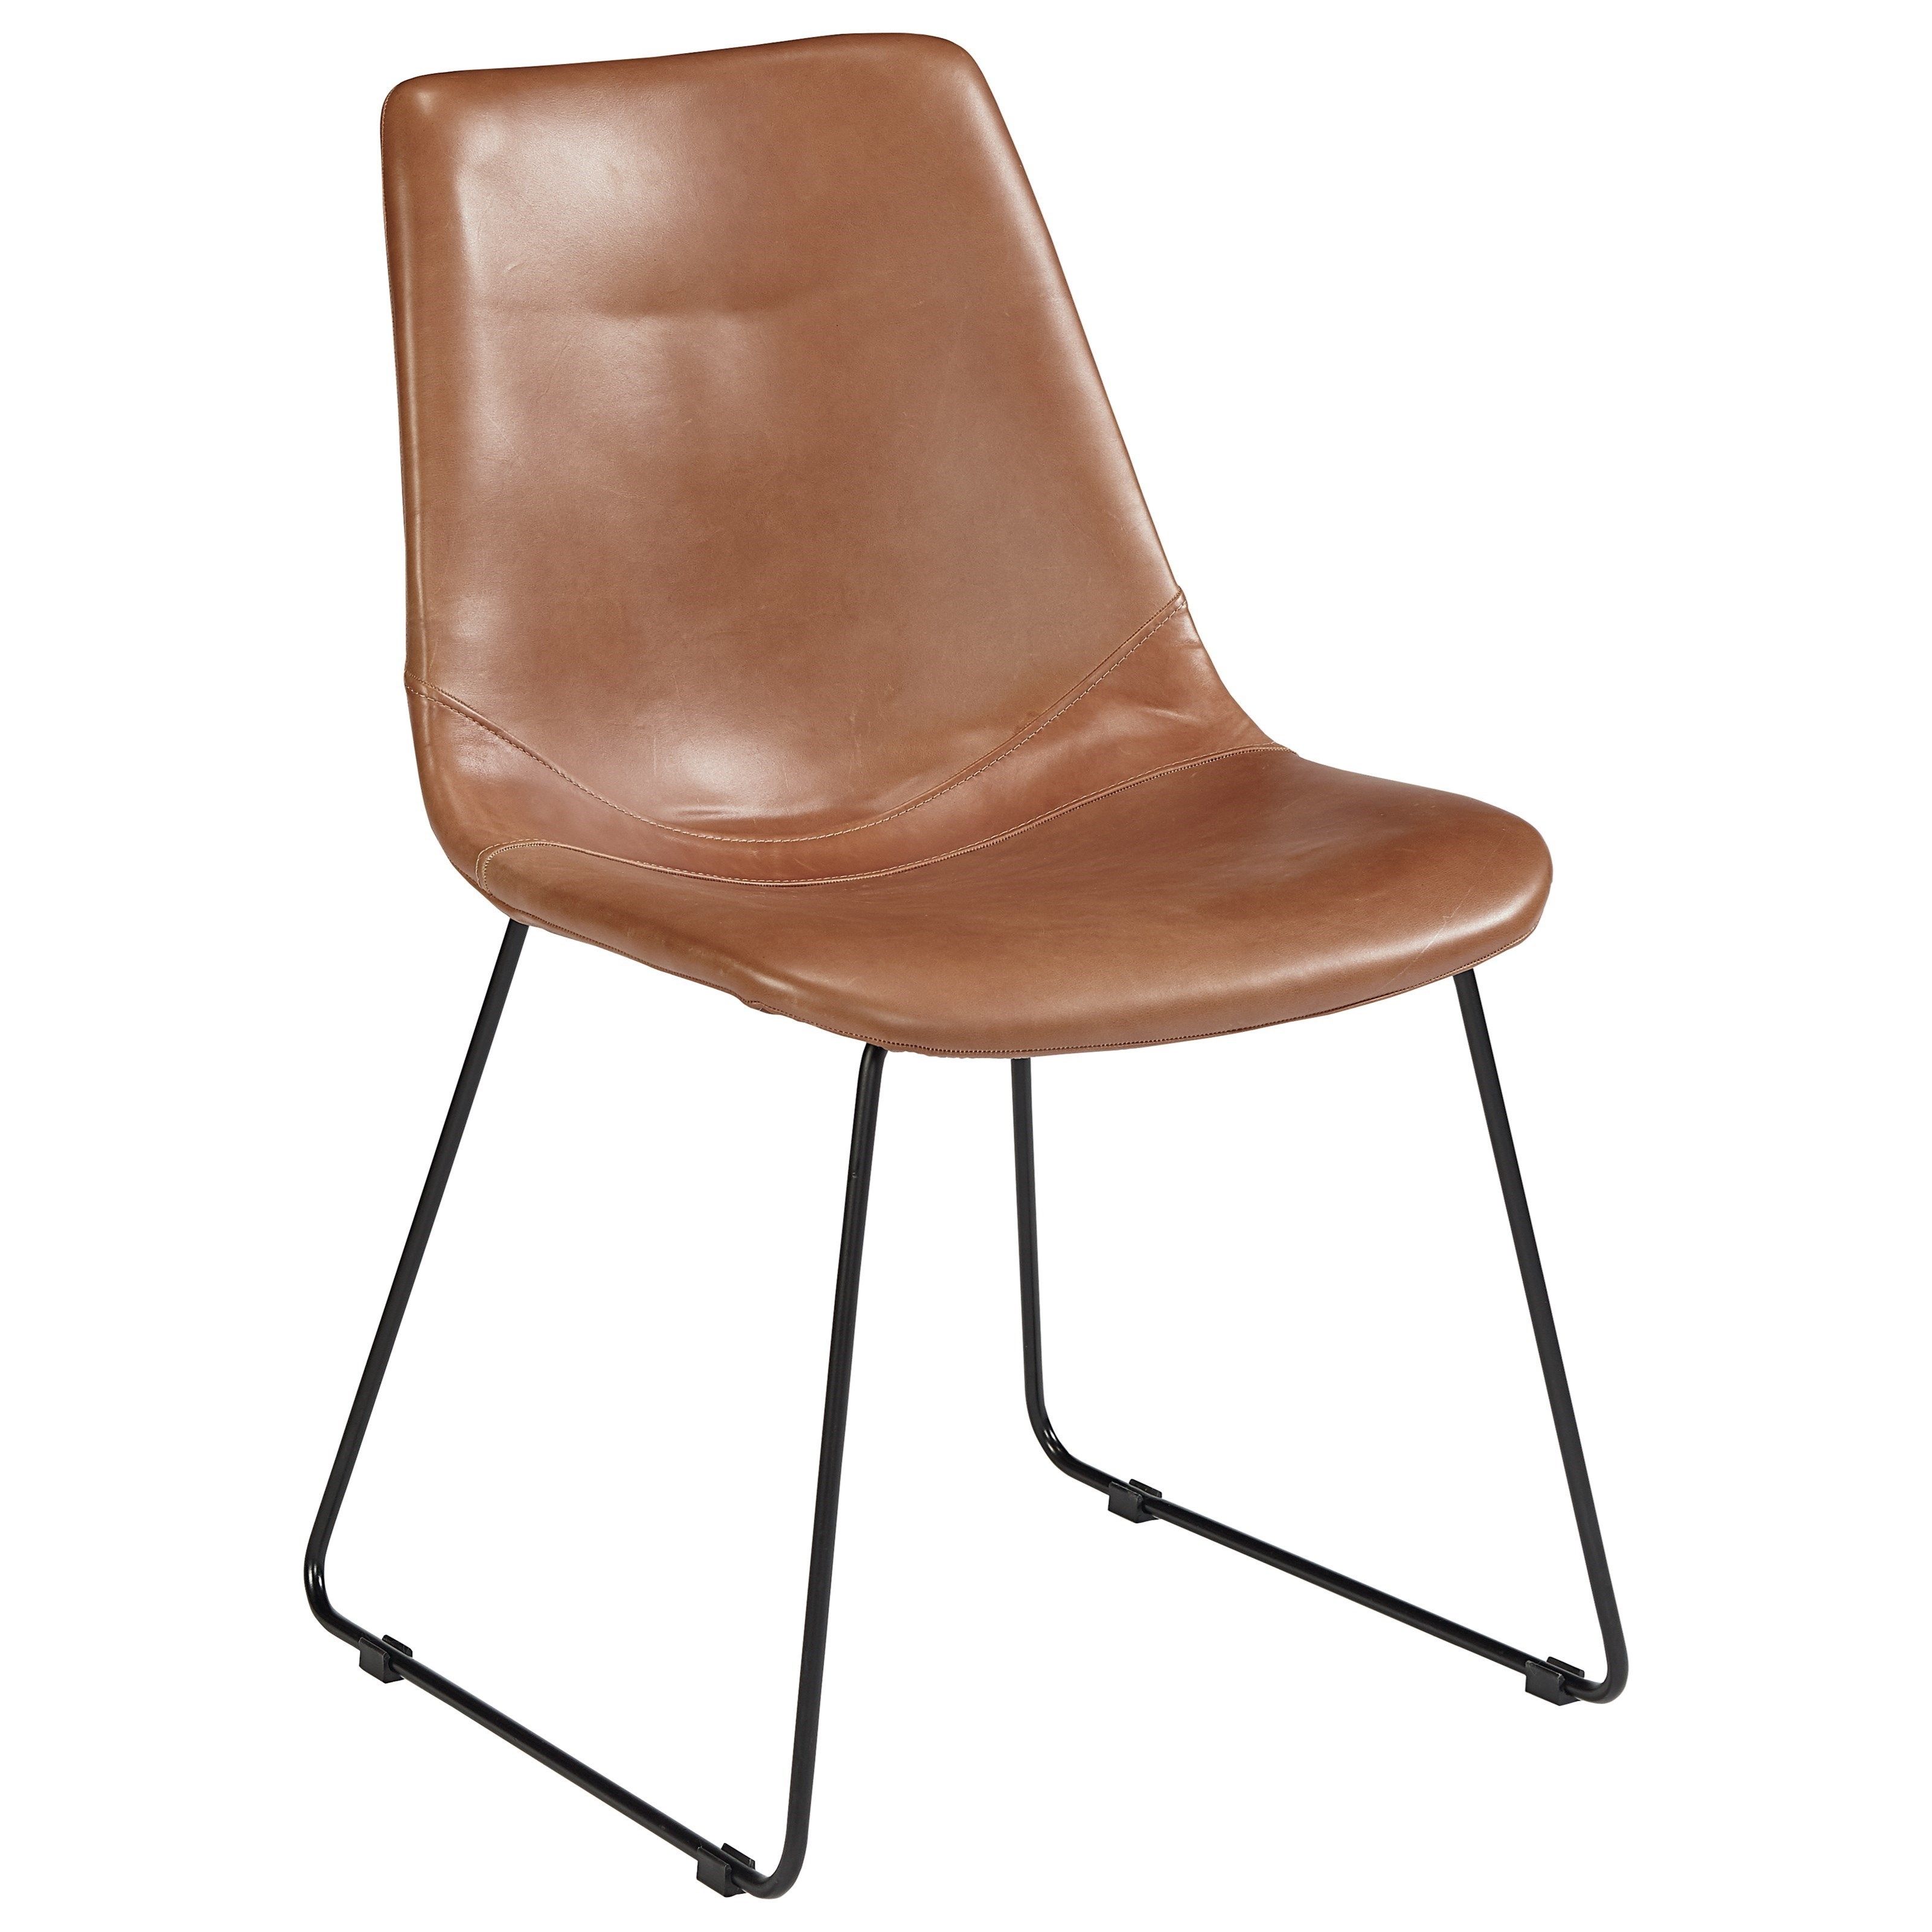 Current Magnolia Home Reed Arm Chairs Intended For Molded Shell Side Chair With Brown Pu Leather Like Fabric (View 5 of 20)